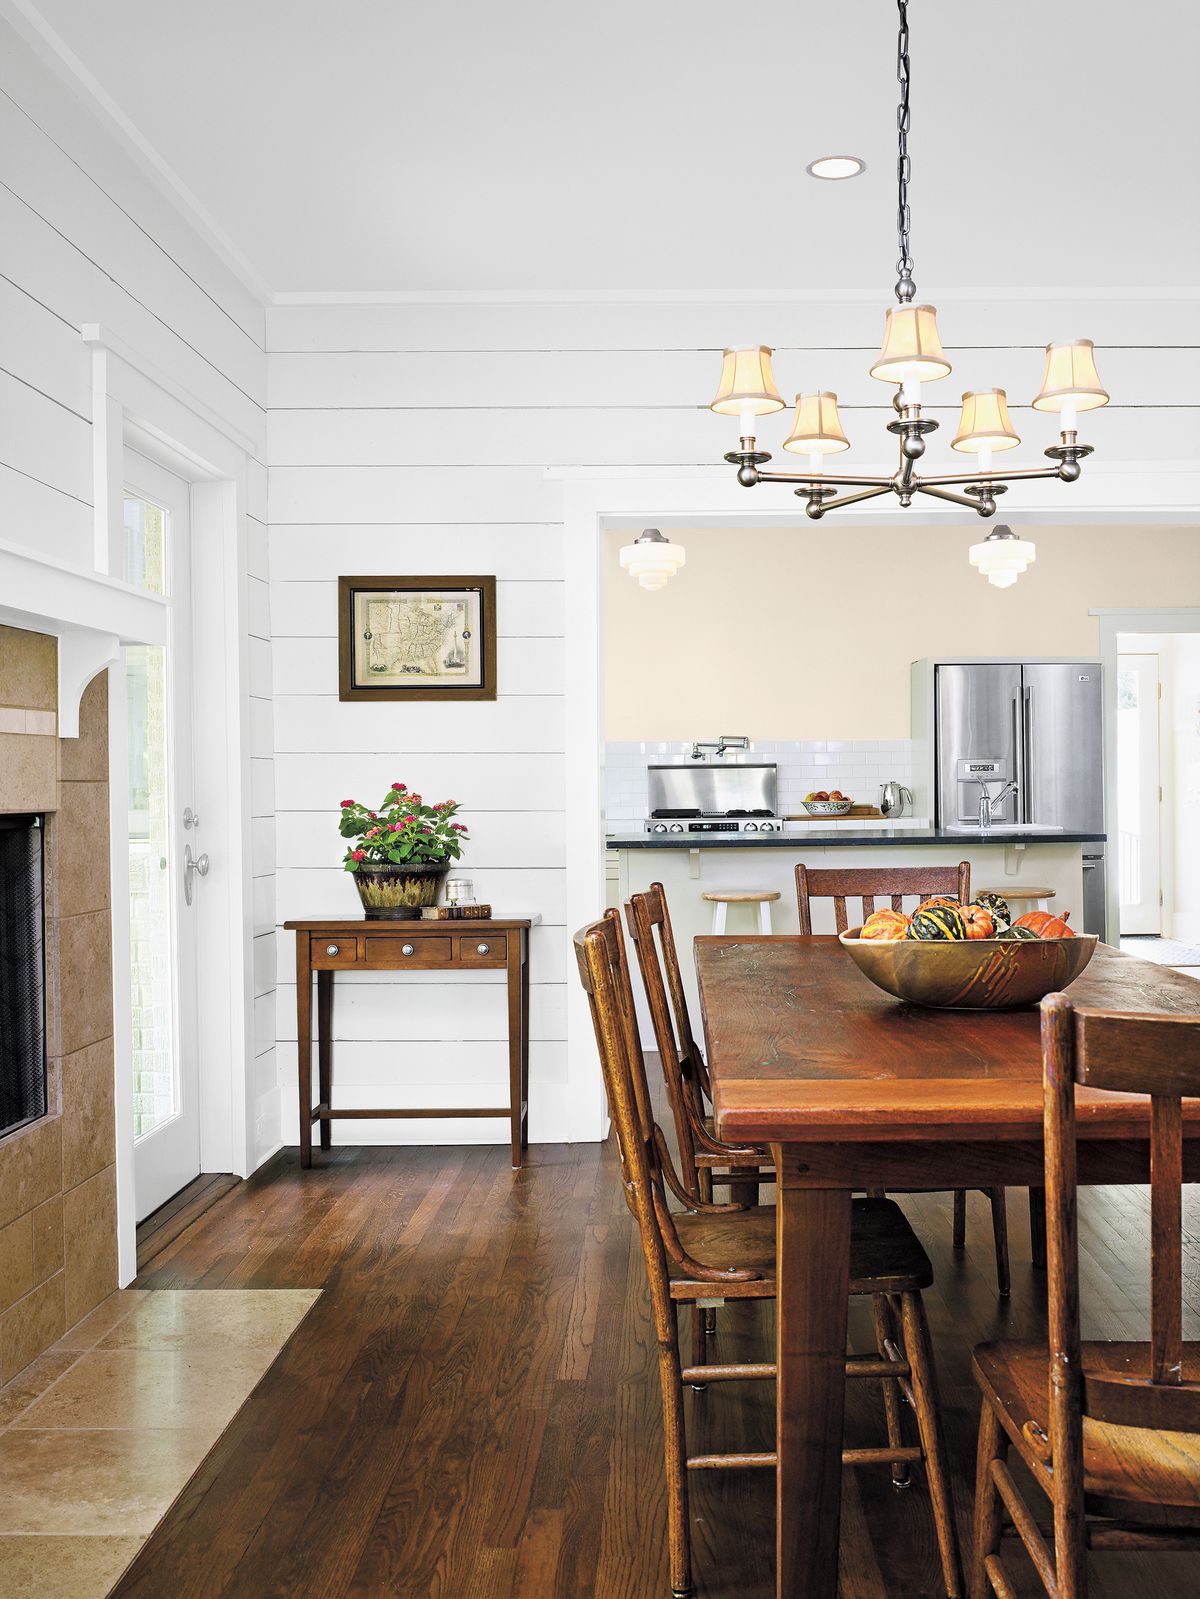 All About Prefinished Wood Floors - This Old House